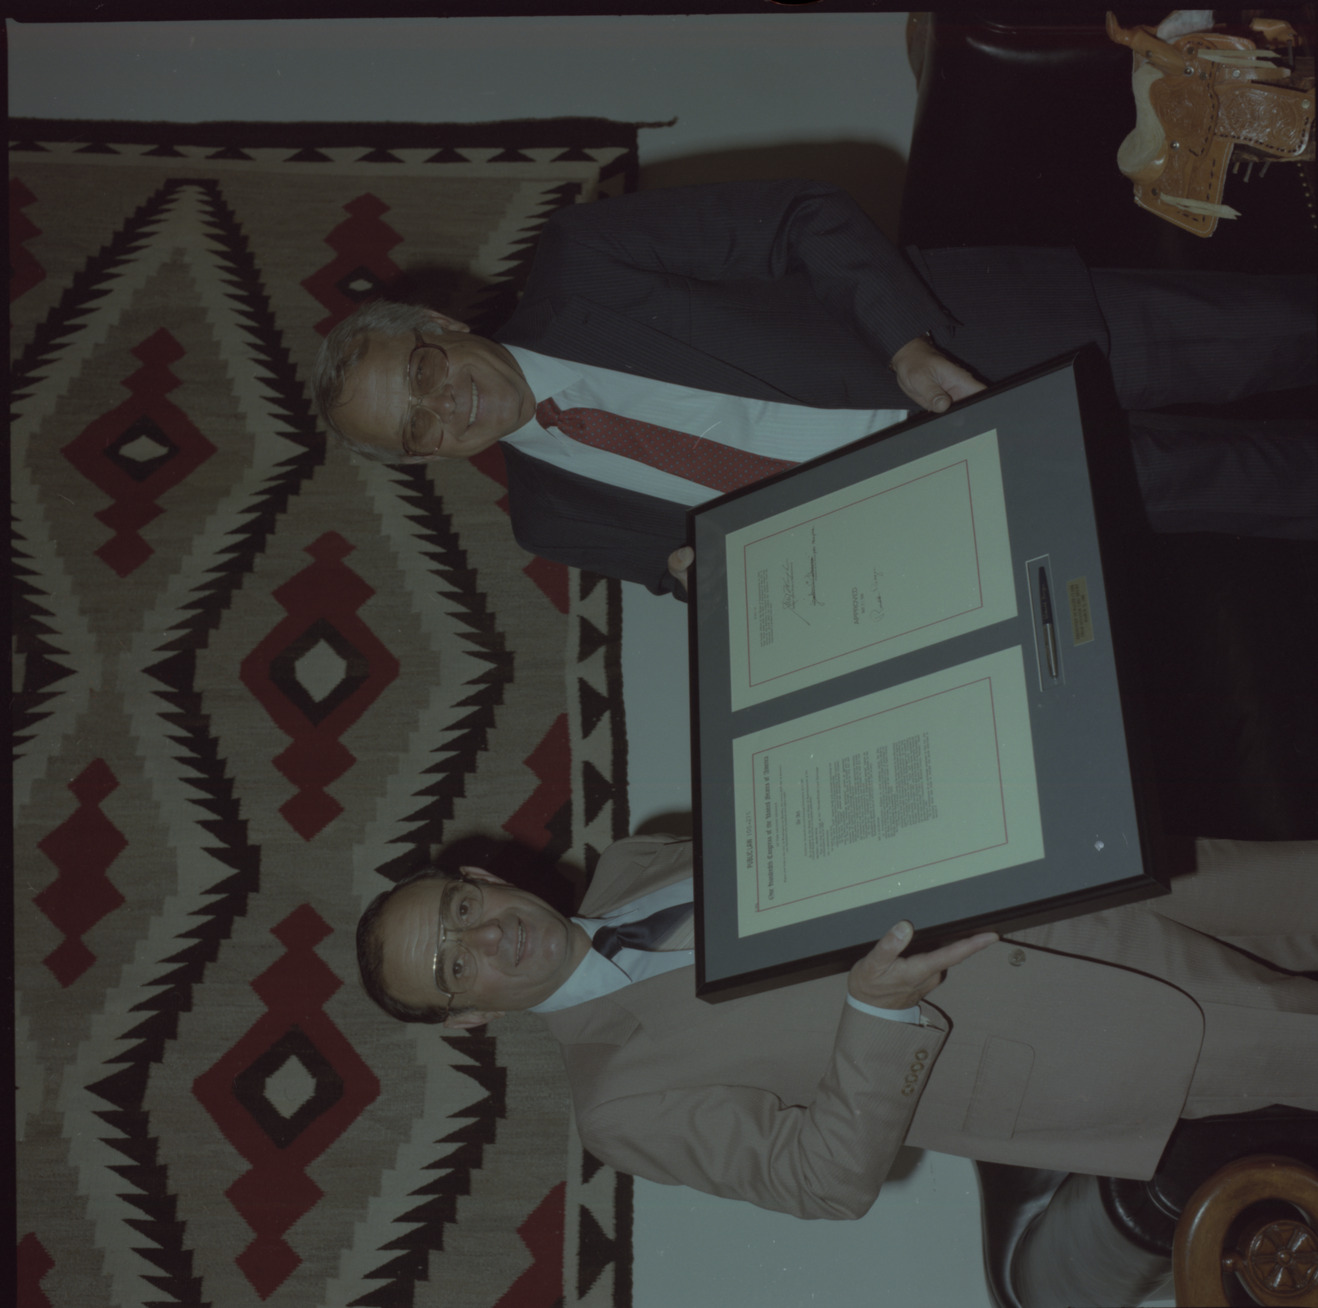 Film negative of Senator Chic Hecht and unidentified man holding Public Law 100-275 (Nevada-Florida Land Exchange Authorization Act of 1988), June 7, 1988